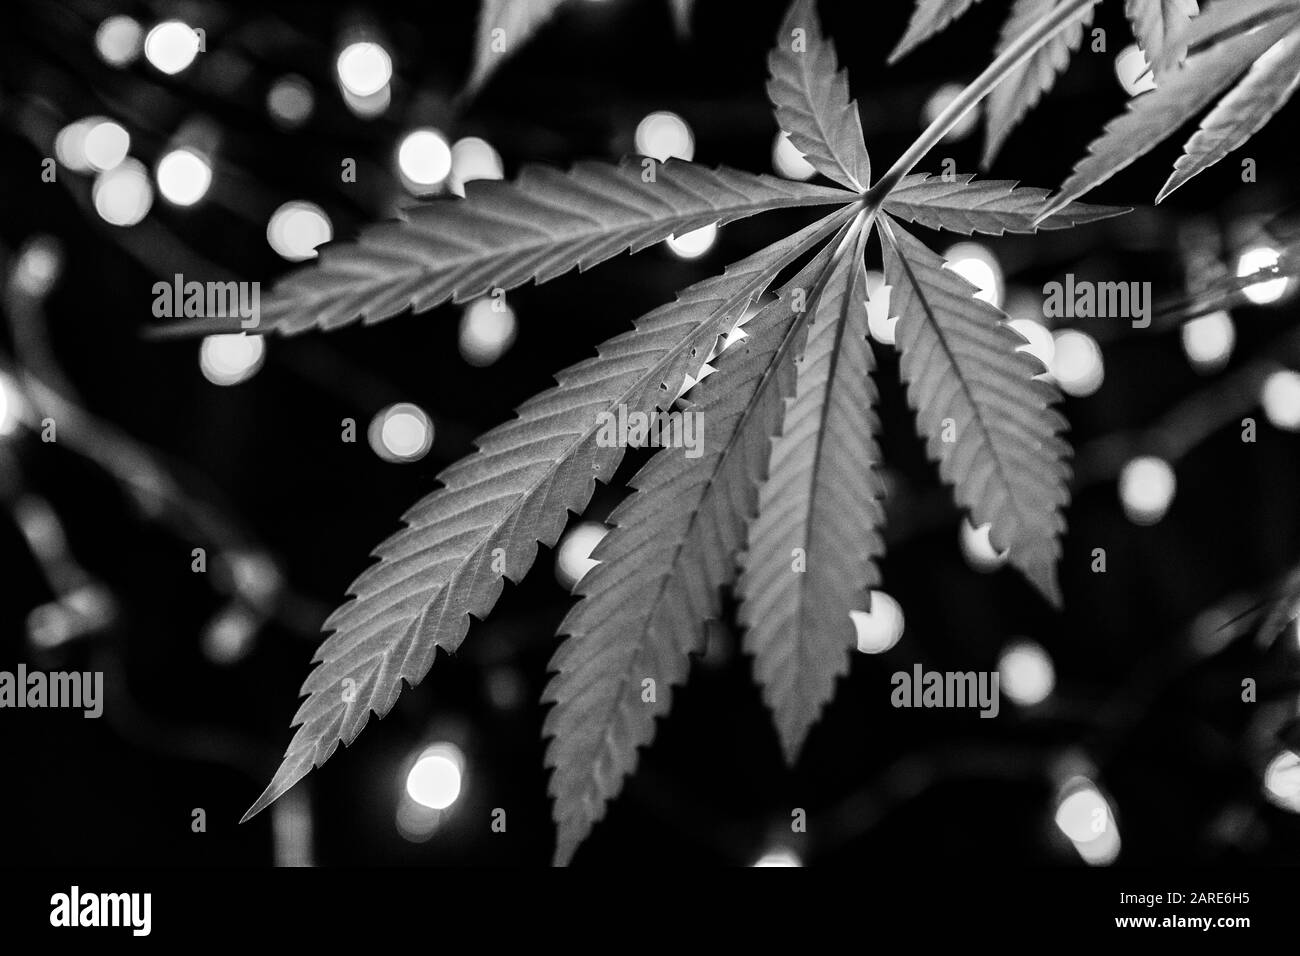 High contrast black and white selective focus closeup of the underside of a cannabis plant leaf shot from low angle. Out of focus lights in the background. Stock Photo